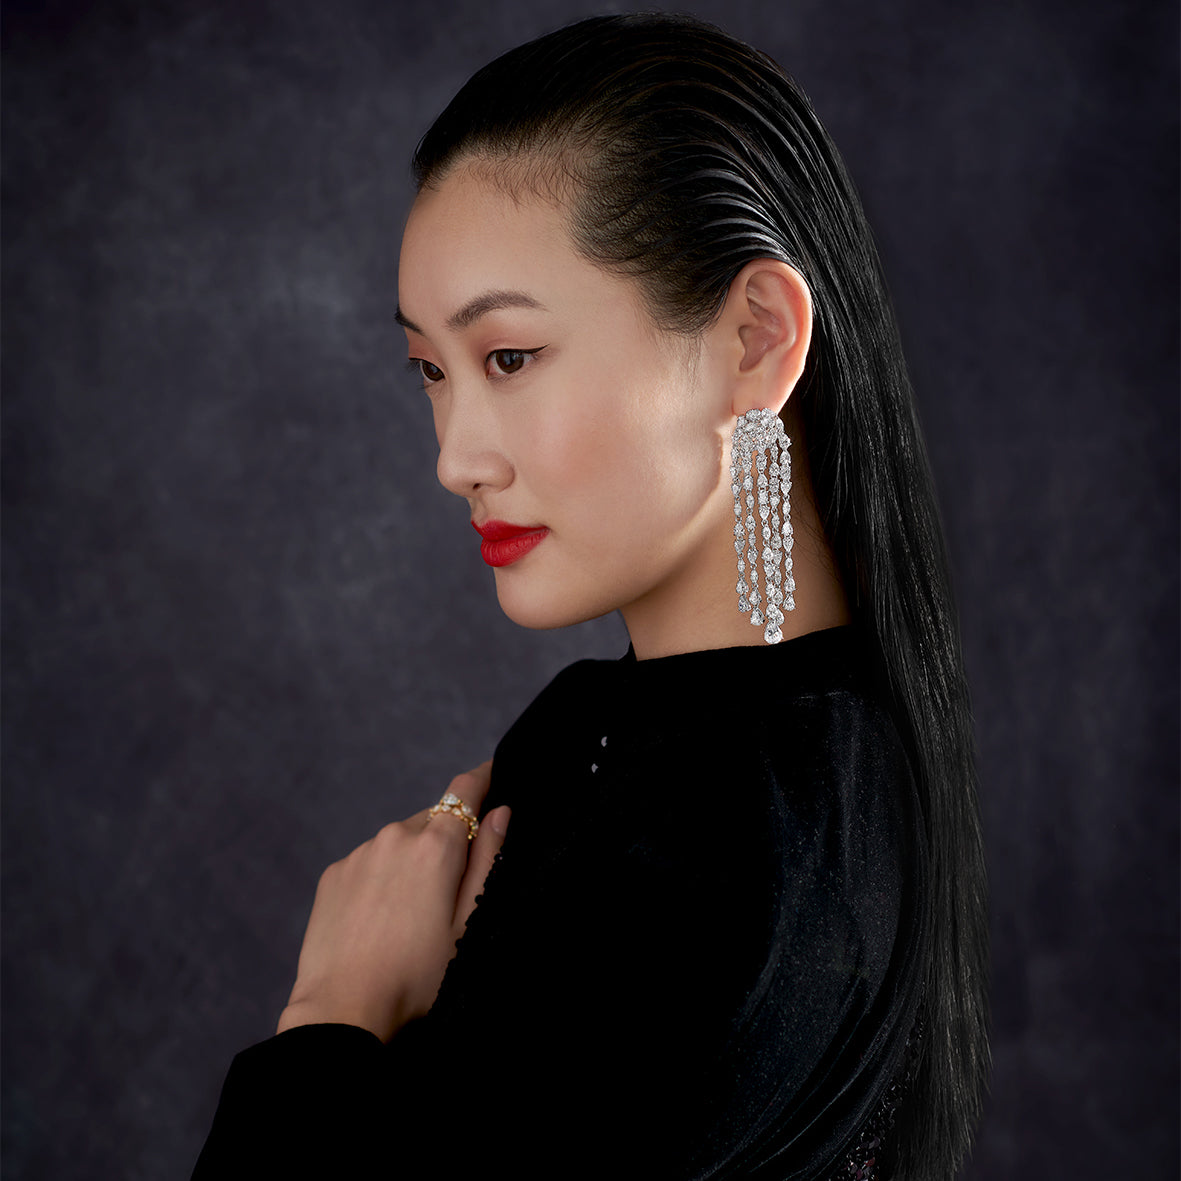 Diamond Cascade Earrings, Earring, Anabela Chan Joaillerie - Fine jewelry with laboratory grown and created gemstones hand-crafted in the United Kingdom. Anabela Chan Joaillerie is the first fine jewellery brand in the world to champion laboratory-grown and created gemstones with high jewellery design, artisanal craftsmanship and a focus on ethical and sustainable innovations.